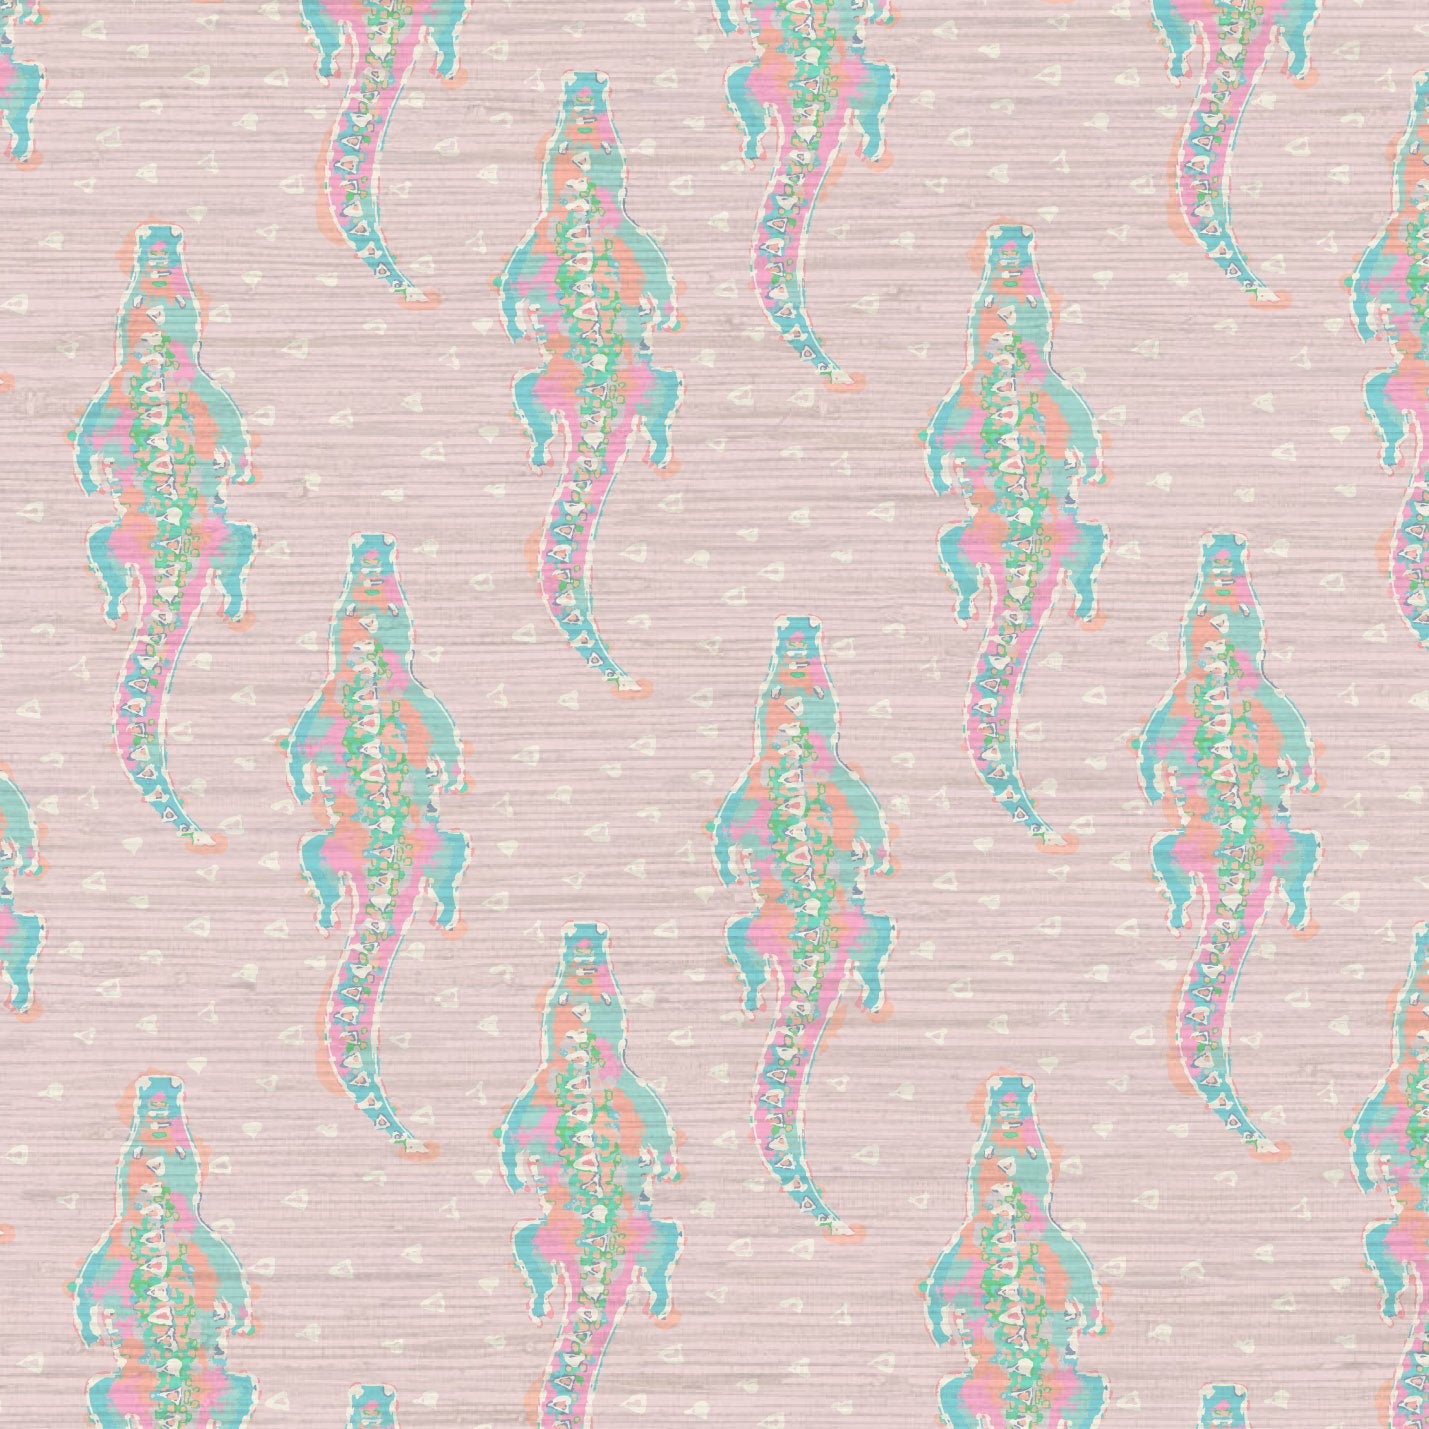 Grasscloth wallpaper Natural Textured Eco-Friendly Non-toxic High-quality  Sustainable Interior Design Bold Custom Tailor-made Retro chic Grand millennial Maximalism  Traditional Dopamine decor Tropical Jungle Coastal Garden Seaside Seashore Waterfront Vacation home styling Retreat Relaxed beach vibes Beach cottage Shoreline Oceanfront Nautical Cabana preppy animal florida gator vertical stripe '90s pale baby pink neon pastel kids playroom